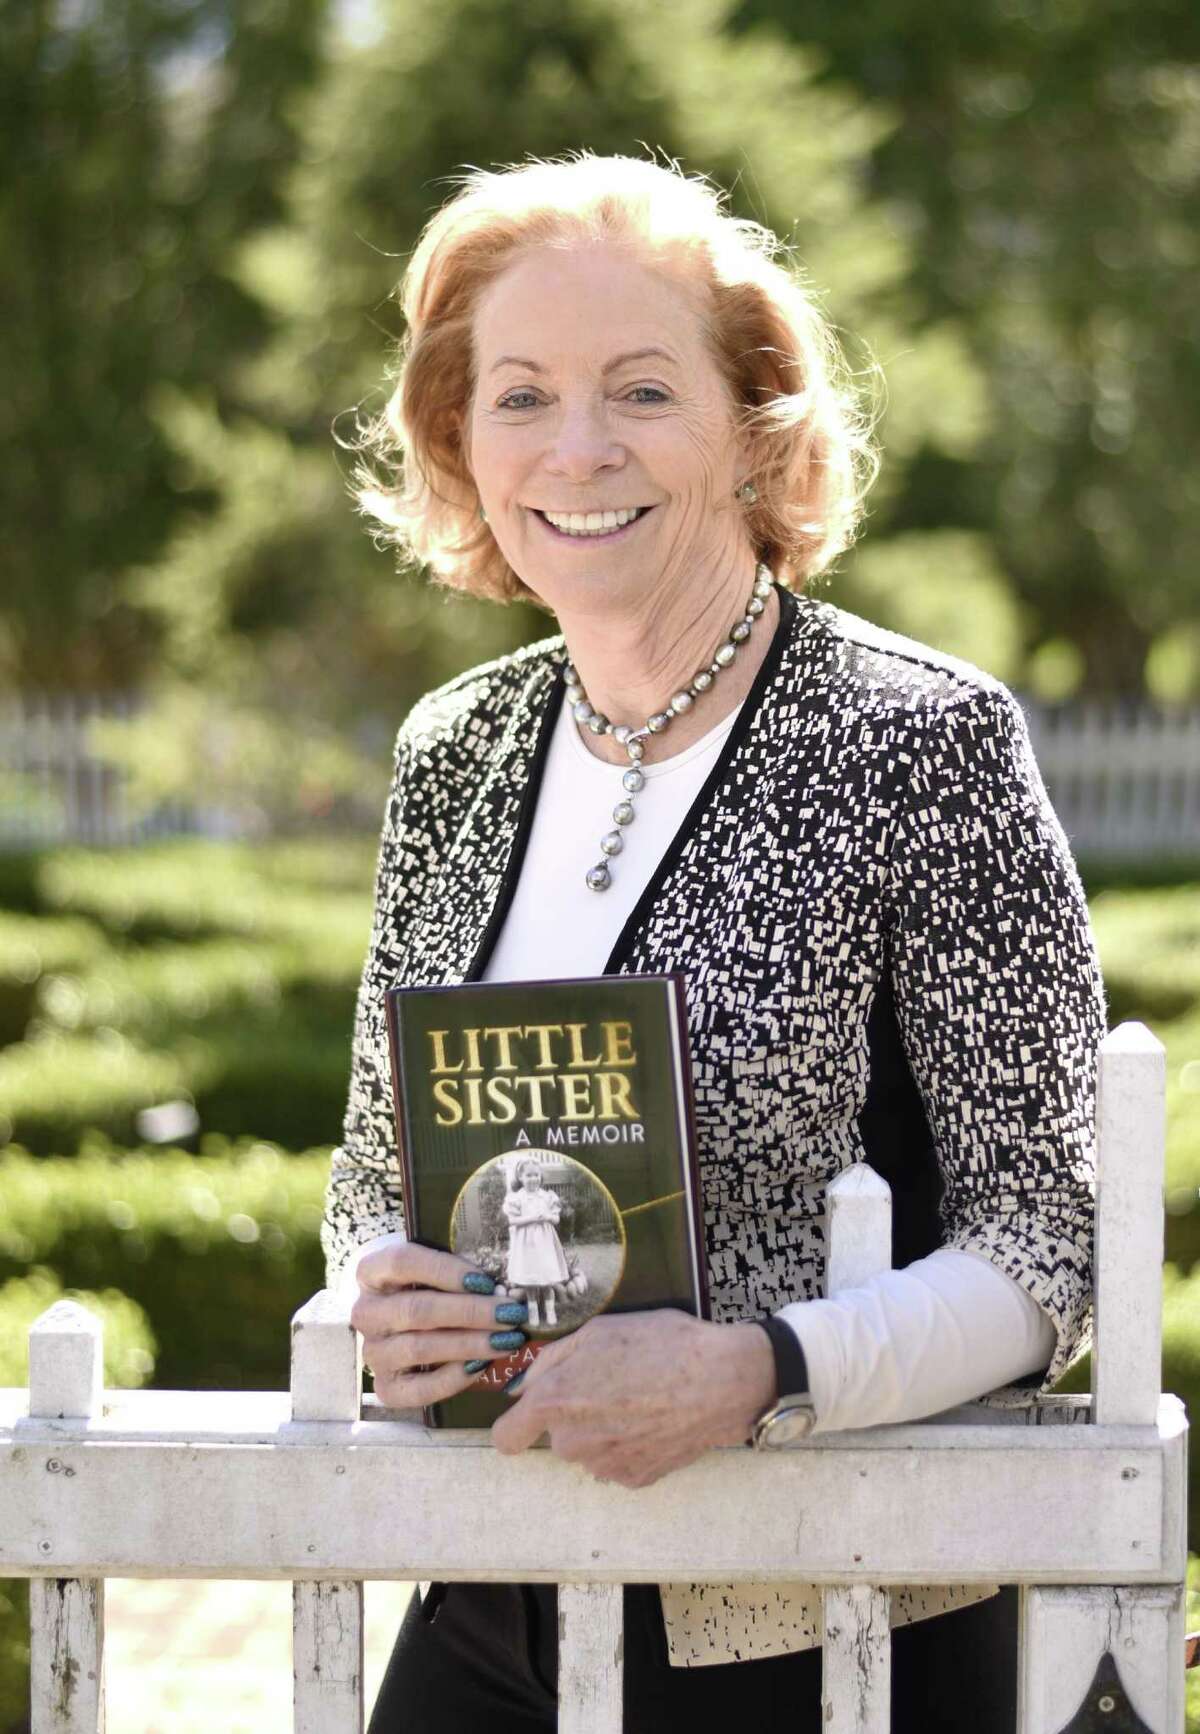 Patricia Chadwick, holding a copy of her new memoir "Little Sister," will speak in the Greenwich Library’s Meeting Room at 7 p.m. Monday as part of the AuthorsLive program. Chadwick writes about her childhood living in a cult-like a religious community called the Slaves of the Immaculate Heart of Mary in Cambridge, Mass. After leaving the community at age 18, she had a 30-year career in the investment business, culminating as a Global Partner at Invesco. The free event is open to the public. Registration is recommended at www.greenwichlibrary.org.